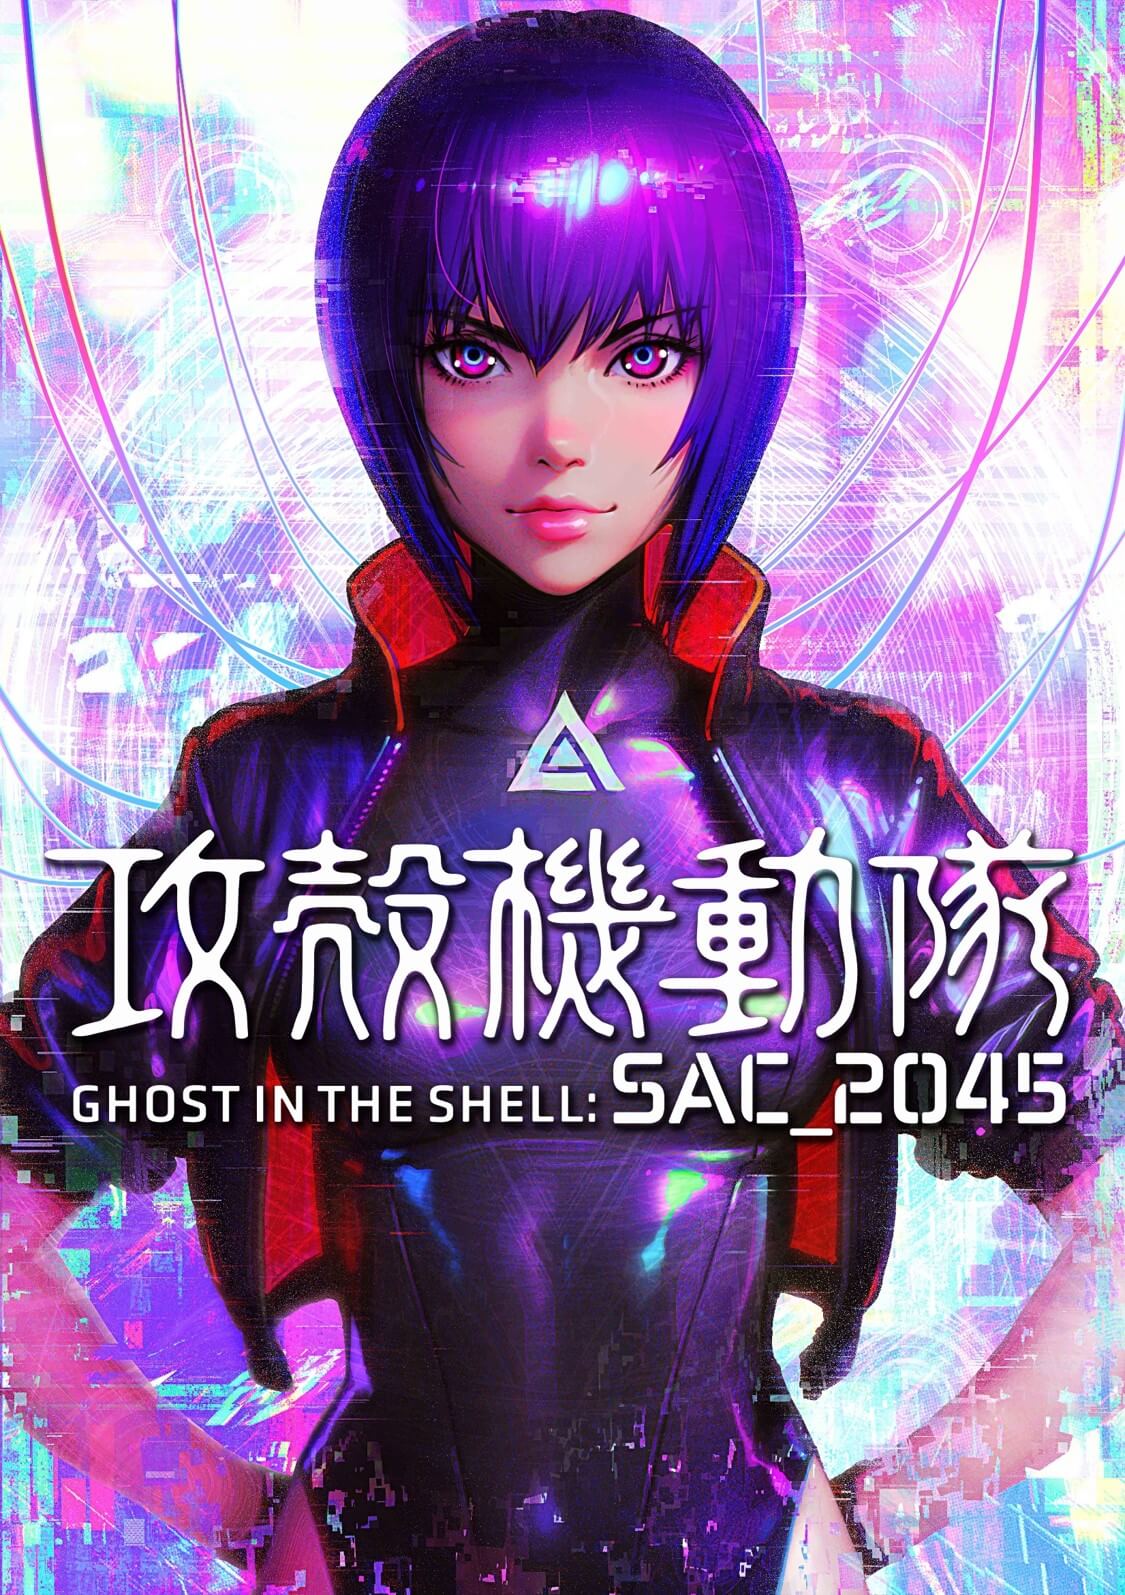 Ghost-in-the-Shell-Sac_2045-KV Check Out the Character Promo Video for "Ghost in the Shell: SAC_2045 Sustainable War", Out On November 12!